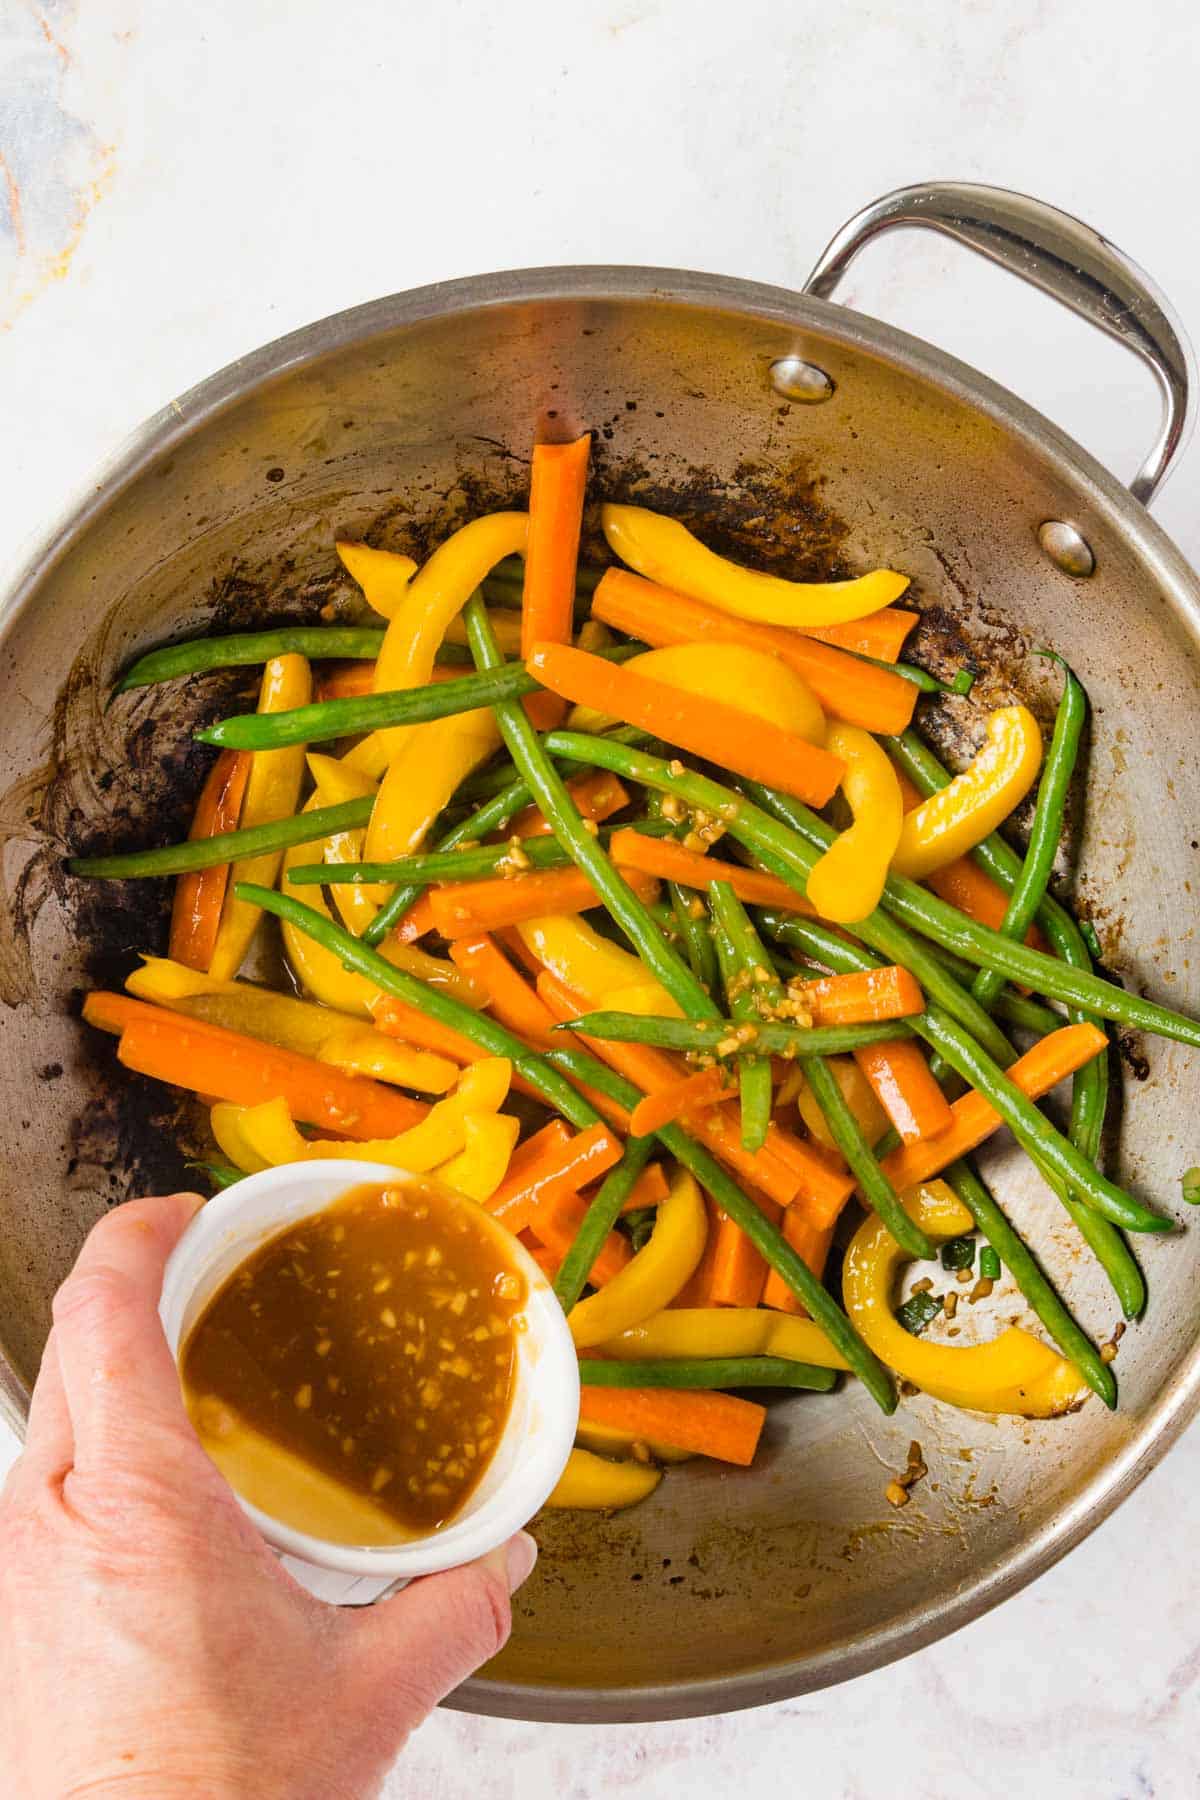 Pouring stir fry sauce over vegetables in a wok.